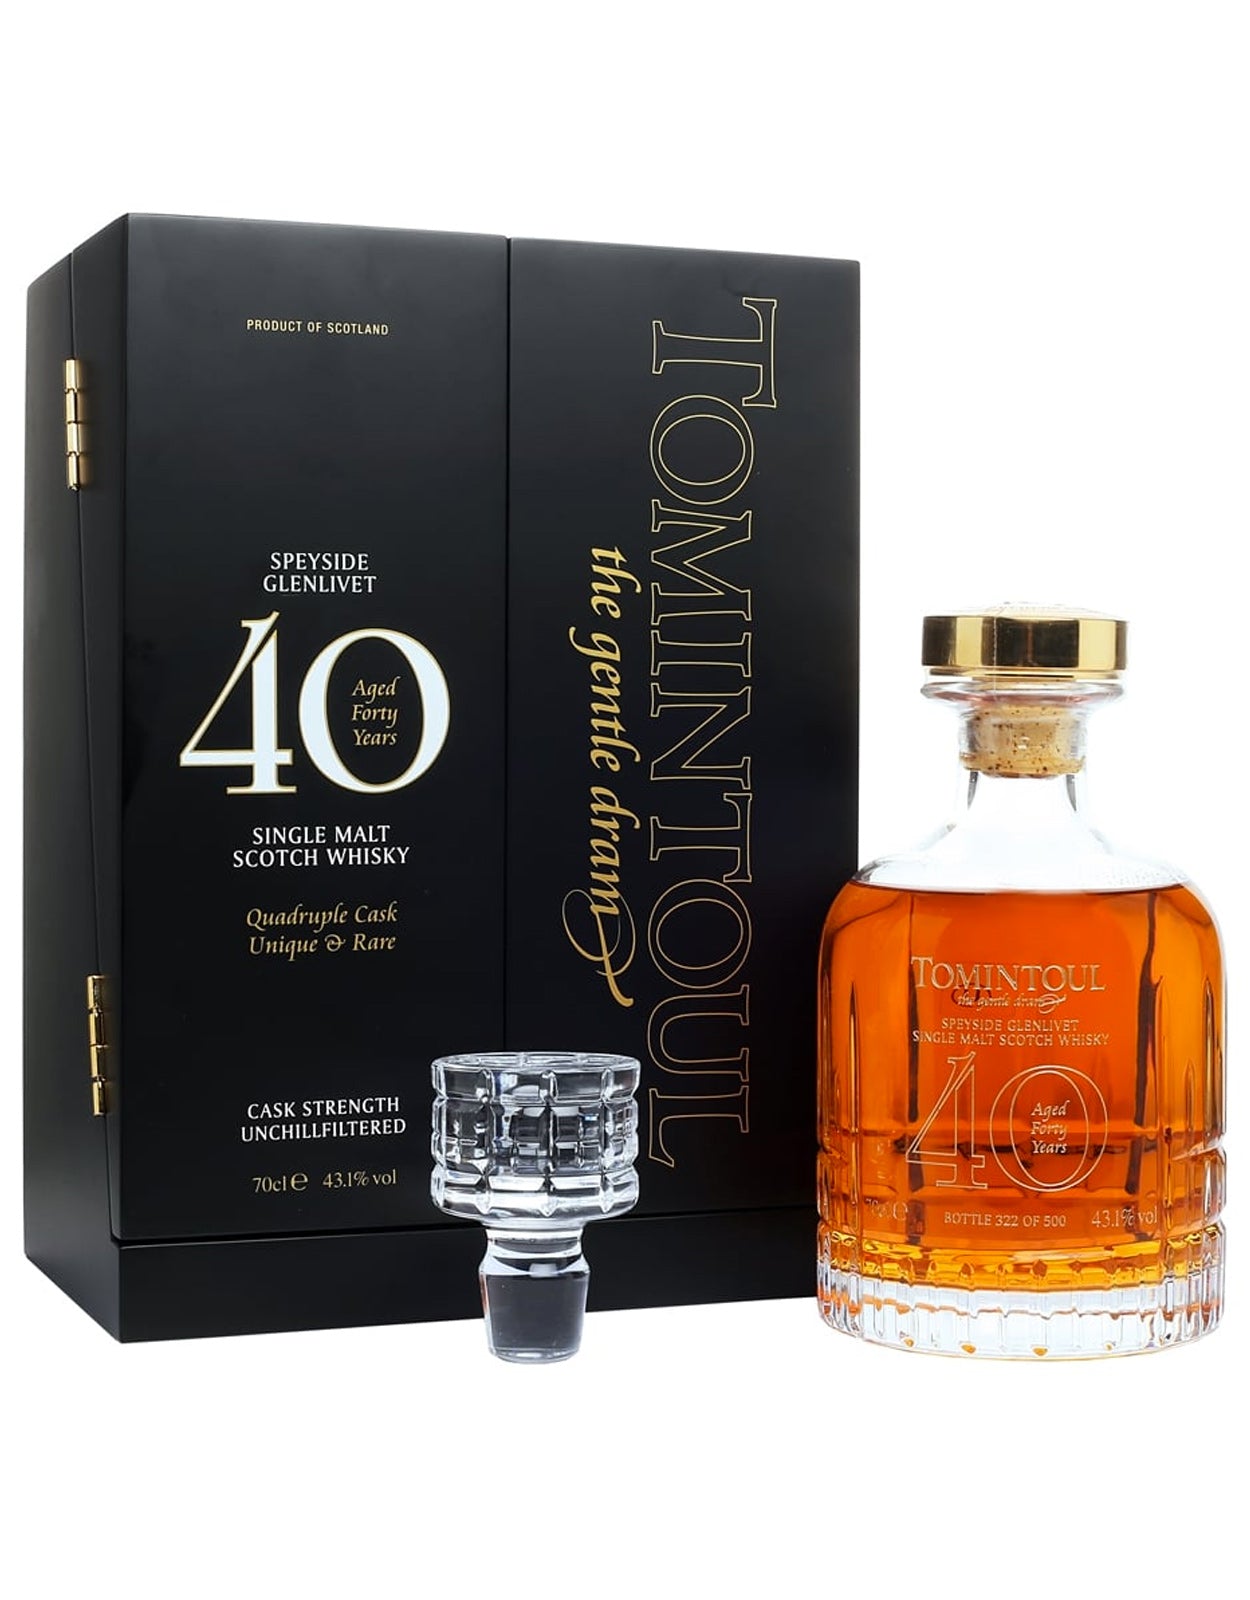 Tomintoul 40 Year Old